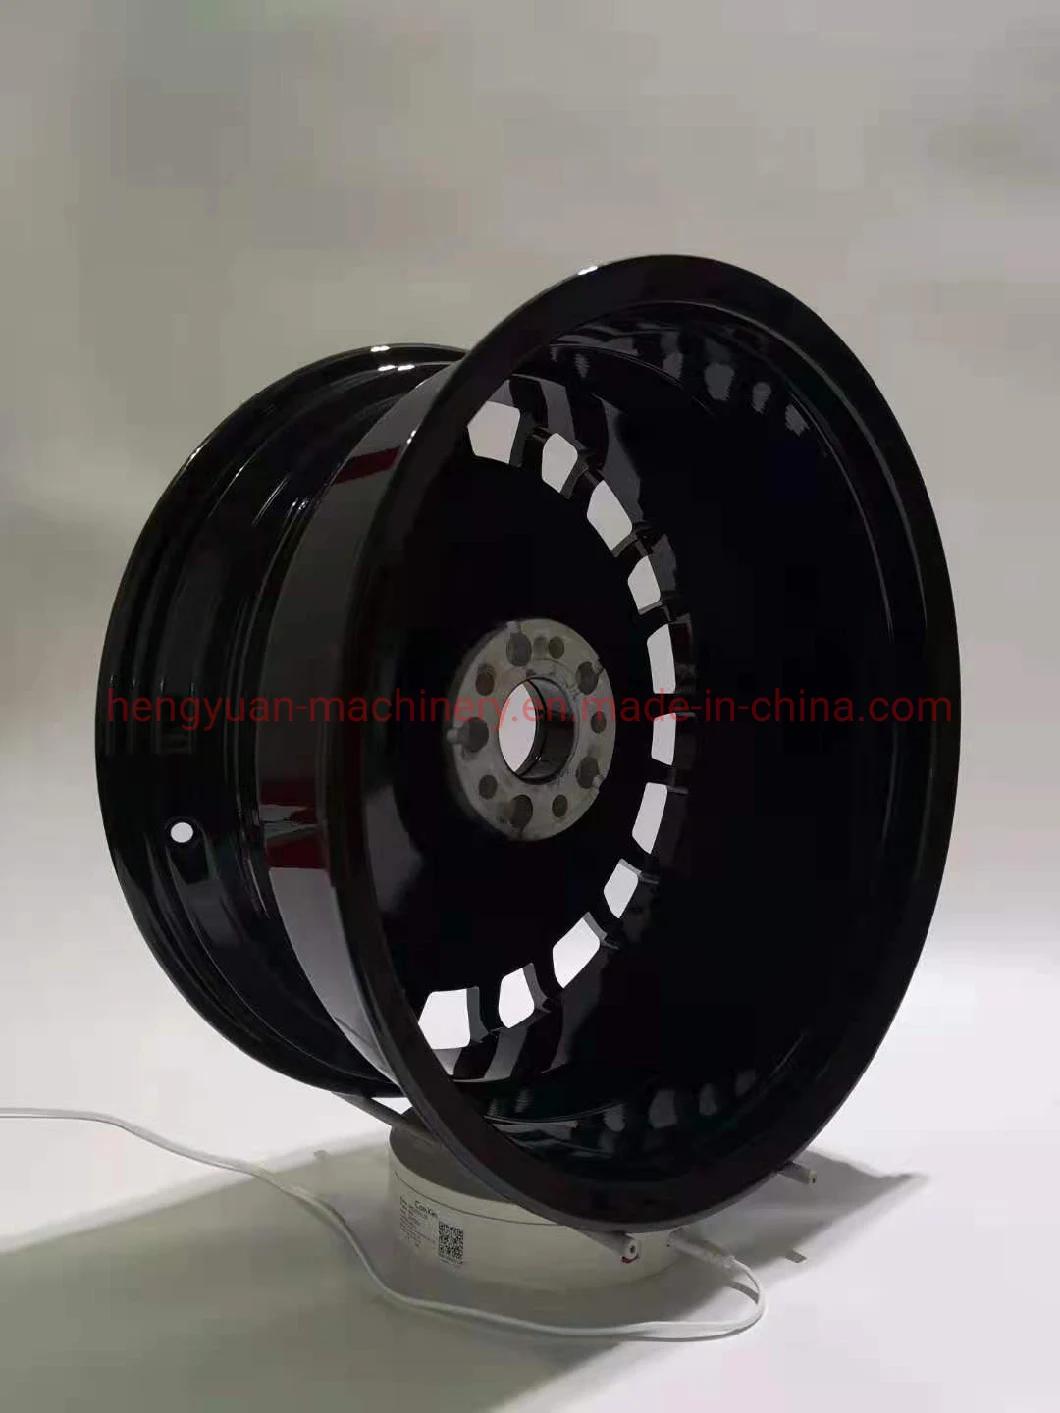 16-20-Super Quality of Forged Aluminum Wheels and Rims or Hubs